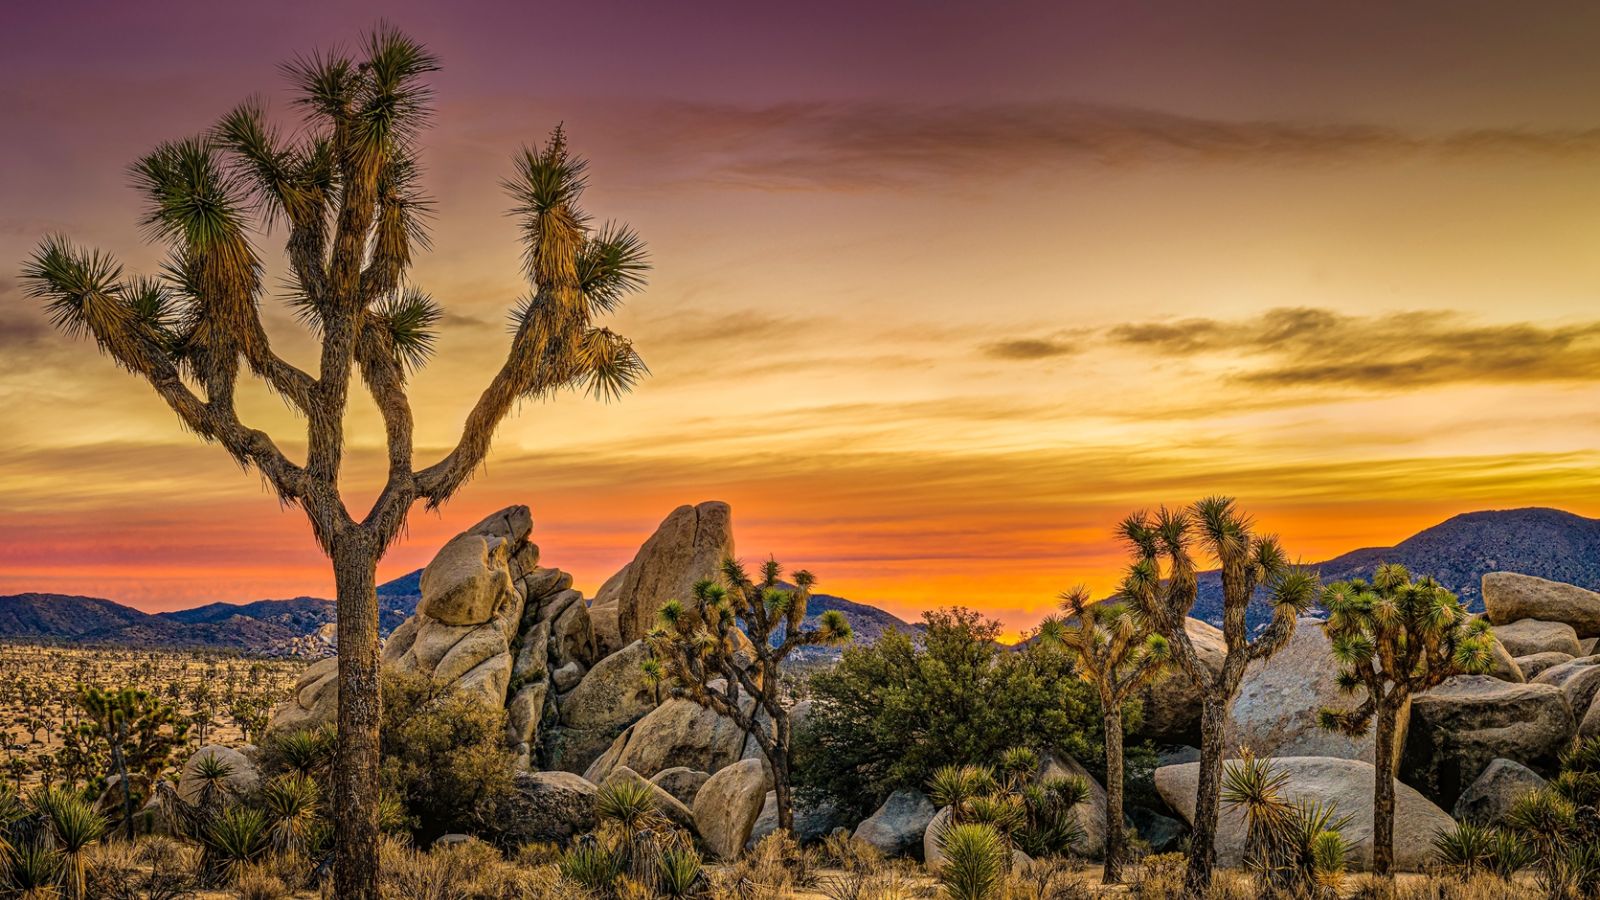 <p>Anyone who’s wondering what’s so special about <a href="https://www.topuniversities.com/where-to-study/north-america/united-states/six-reasons-why-you-should-visit-joshua-tree-national-park#:~:text=These%20Joshua%20trees%20are%20actually,t%20be%20matched%20anywhere%20else.">Joshua Tree National Park</a> should read up on its history or why it’s recommended to visit the place. From the Yucca trees themselves to the park, its wide variety of wildlife, and the nighttime star-spangled sky, what more could you ask for?</p>